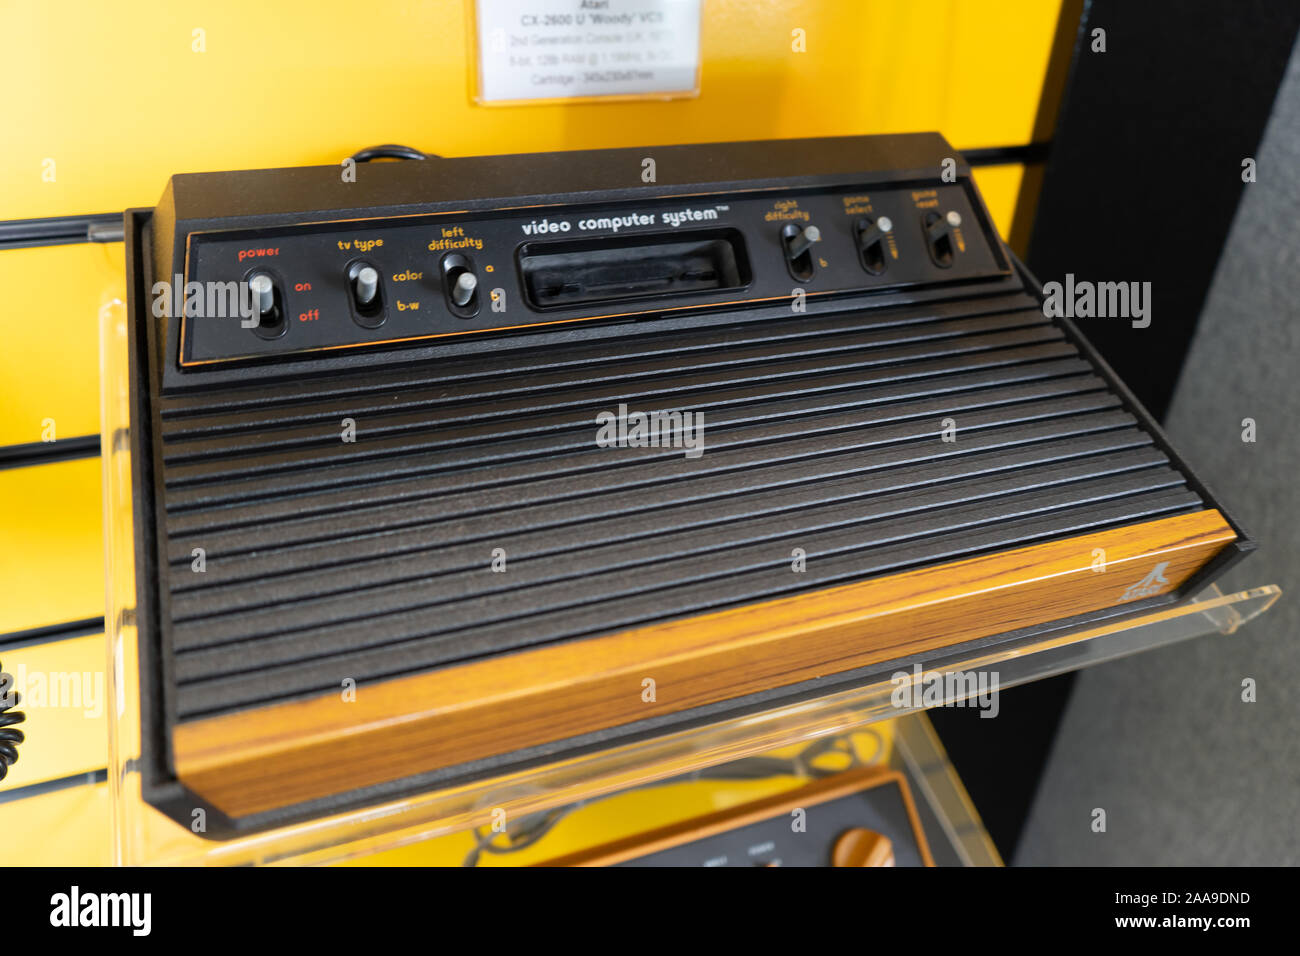 An Atari 2600 video games console, a retro games console produced in 1982 and sold throughout the 80's Stock Photo